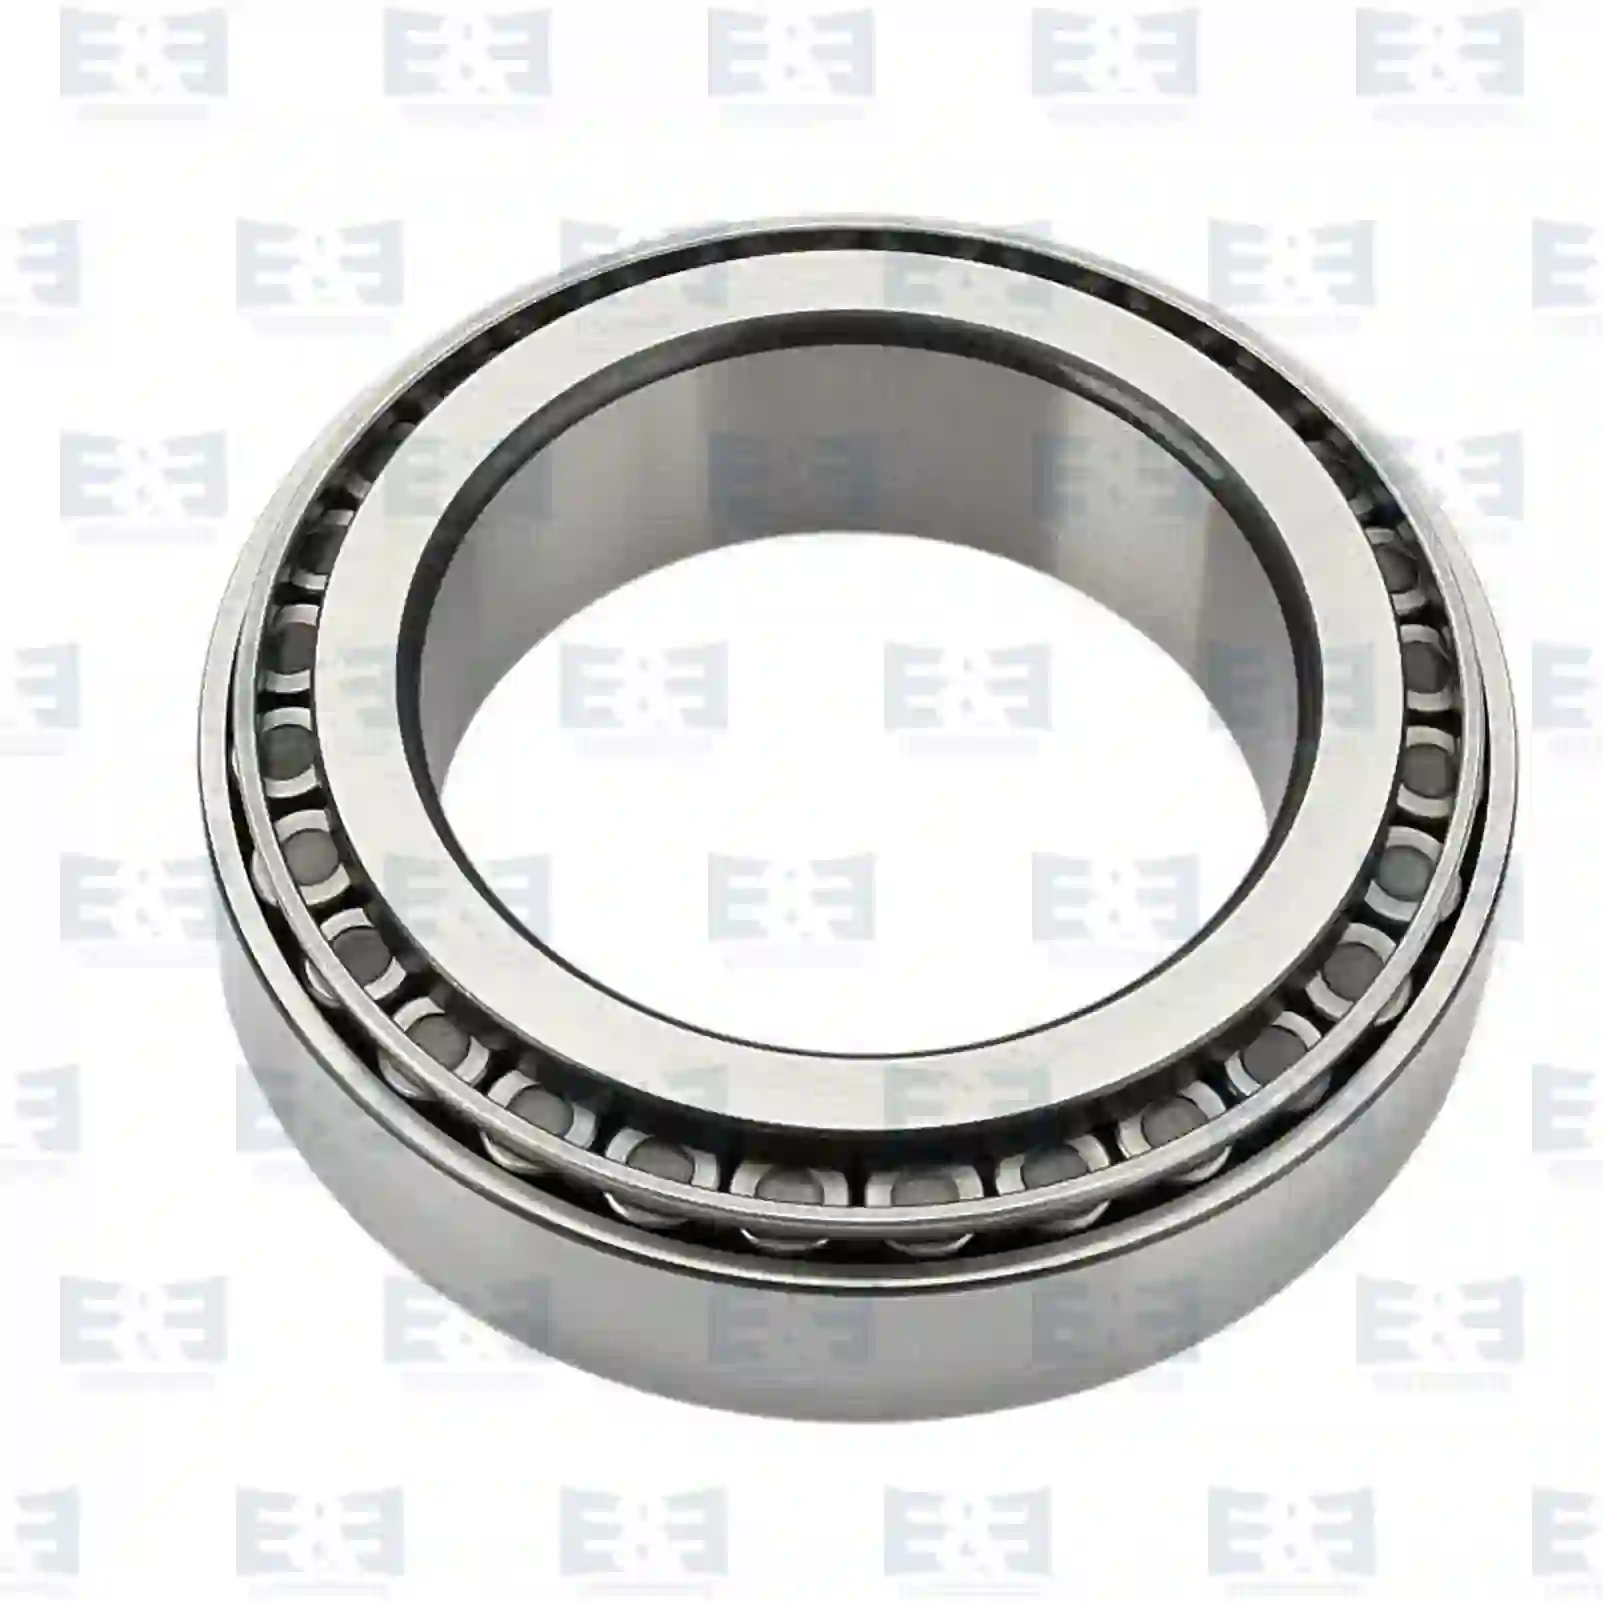 Hub Tapered roller bearing, EE No 2E2284036 ,  oem no:0266488, 266488, 41800341, 41800341, 06324990096, 0009809702, 0009819702, 0039812605, 0039812805, 0059814905, 0959443021, 5010319057, 5010443751, 5010443791, 5010534617, 351713, 3152068, 7174946, ZG03025-0008 E&E Truck Spare Parts | Truck Spare Parts, Auotomotive Spare Parts